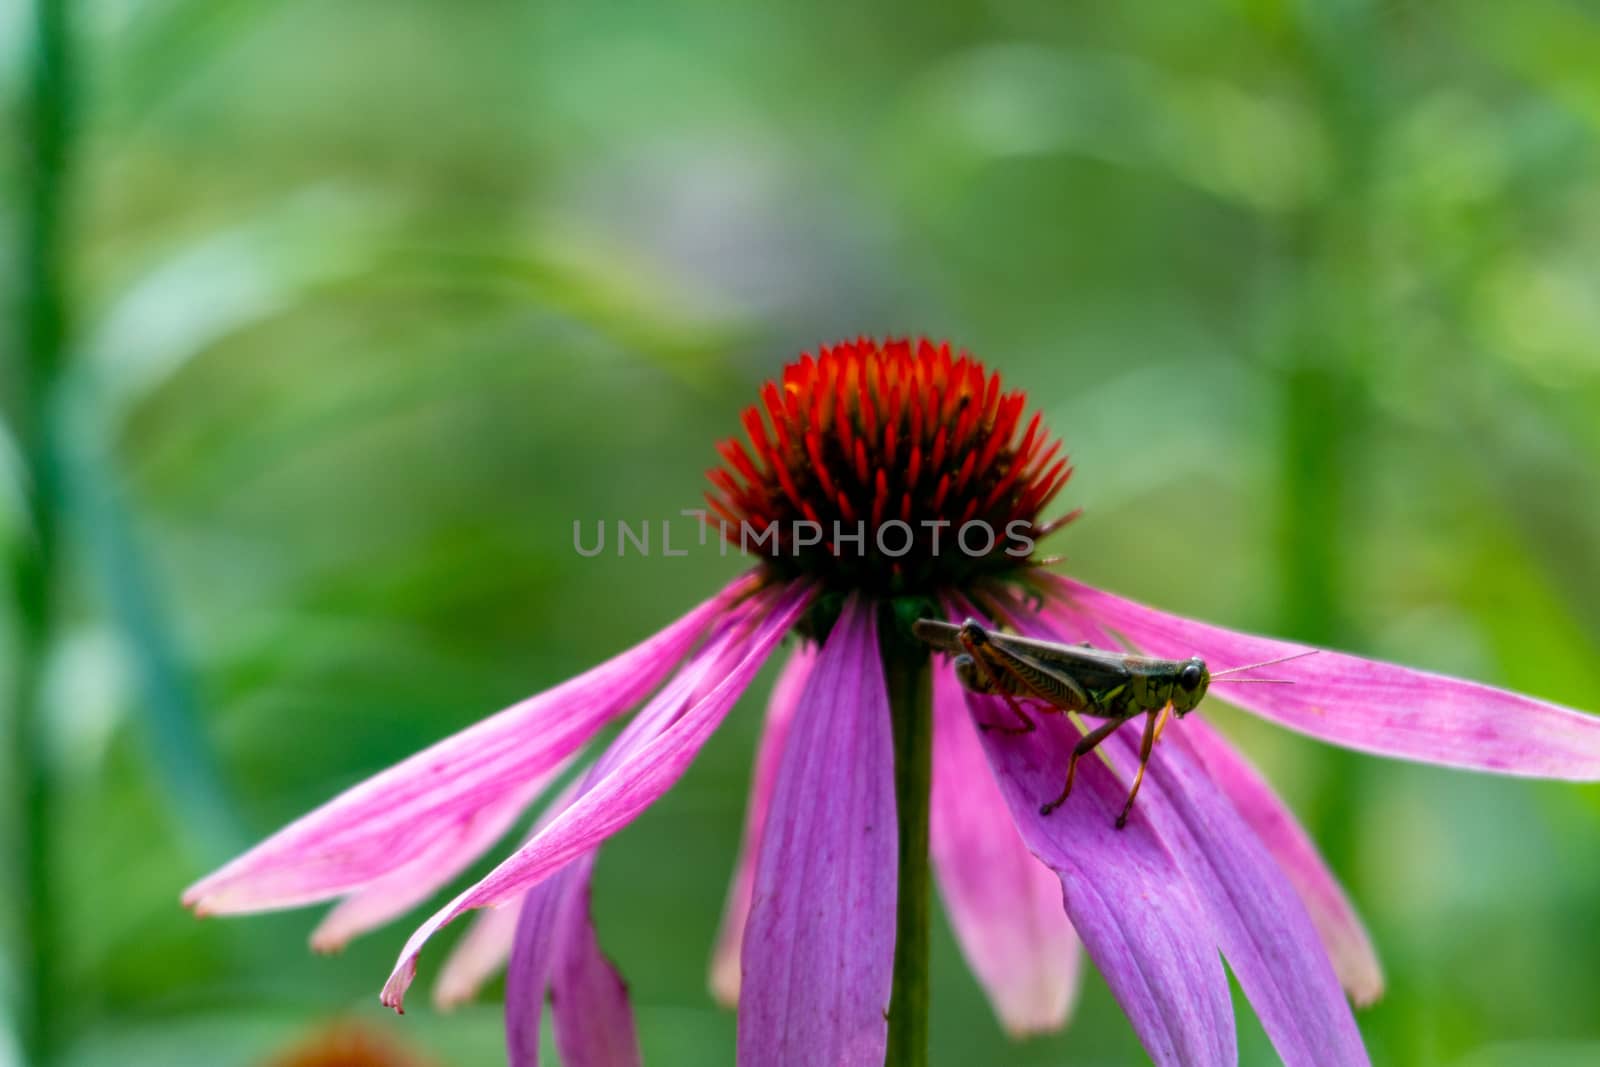 Grasshopper on coneflower. Cute red-legged grasshopper resting on top of a cone flower, beautiful shades of pink, purple, orange and green, great nature or. by mynewturtle1